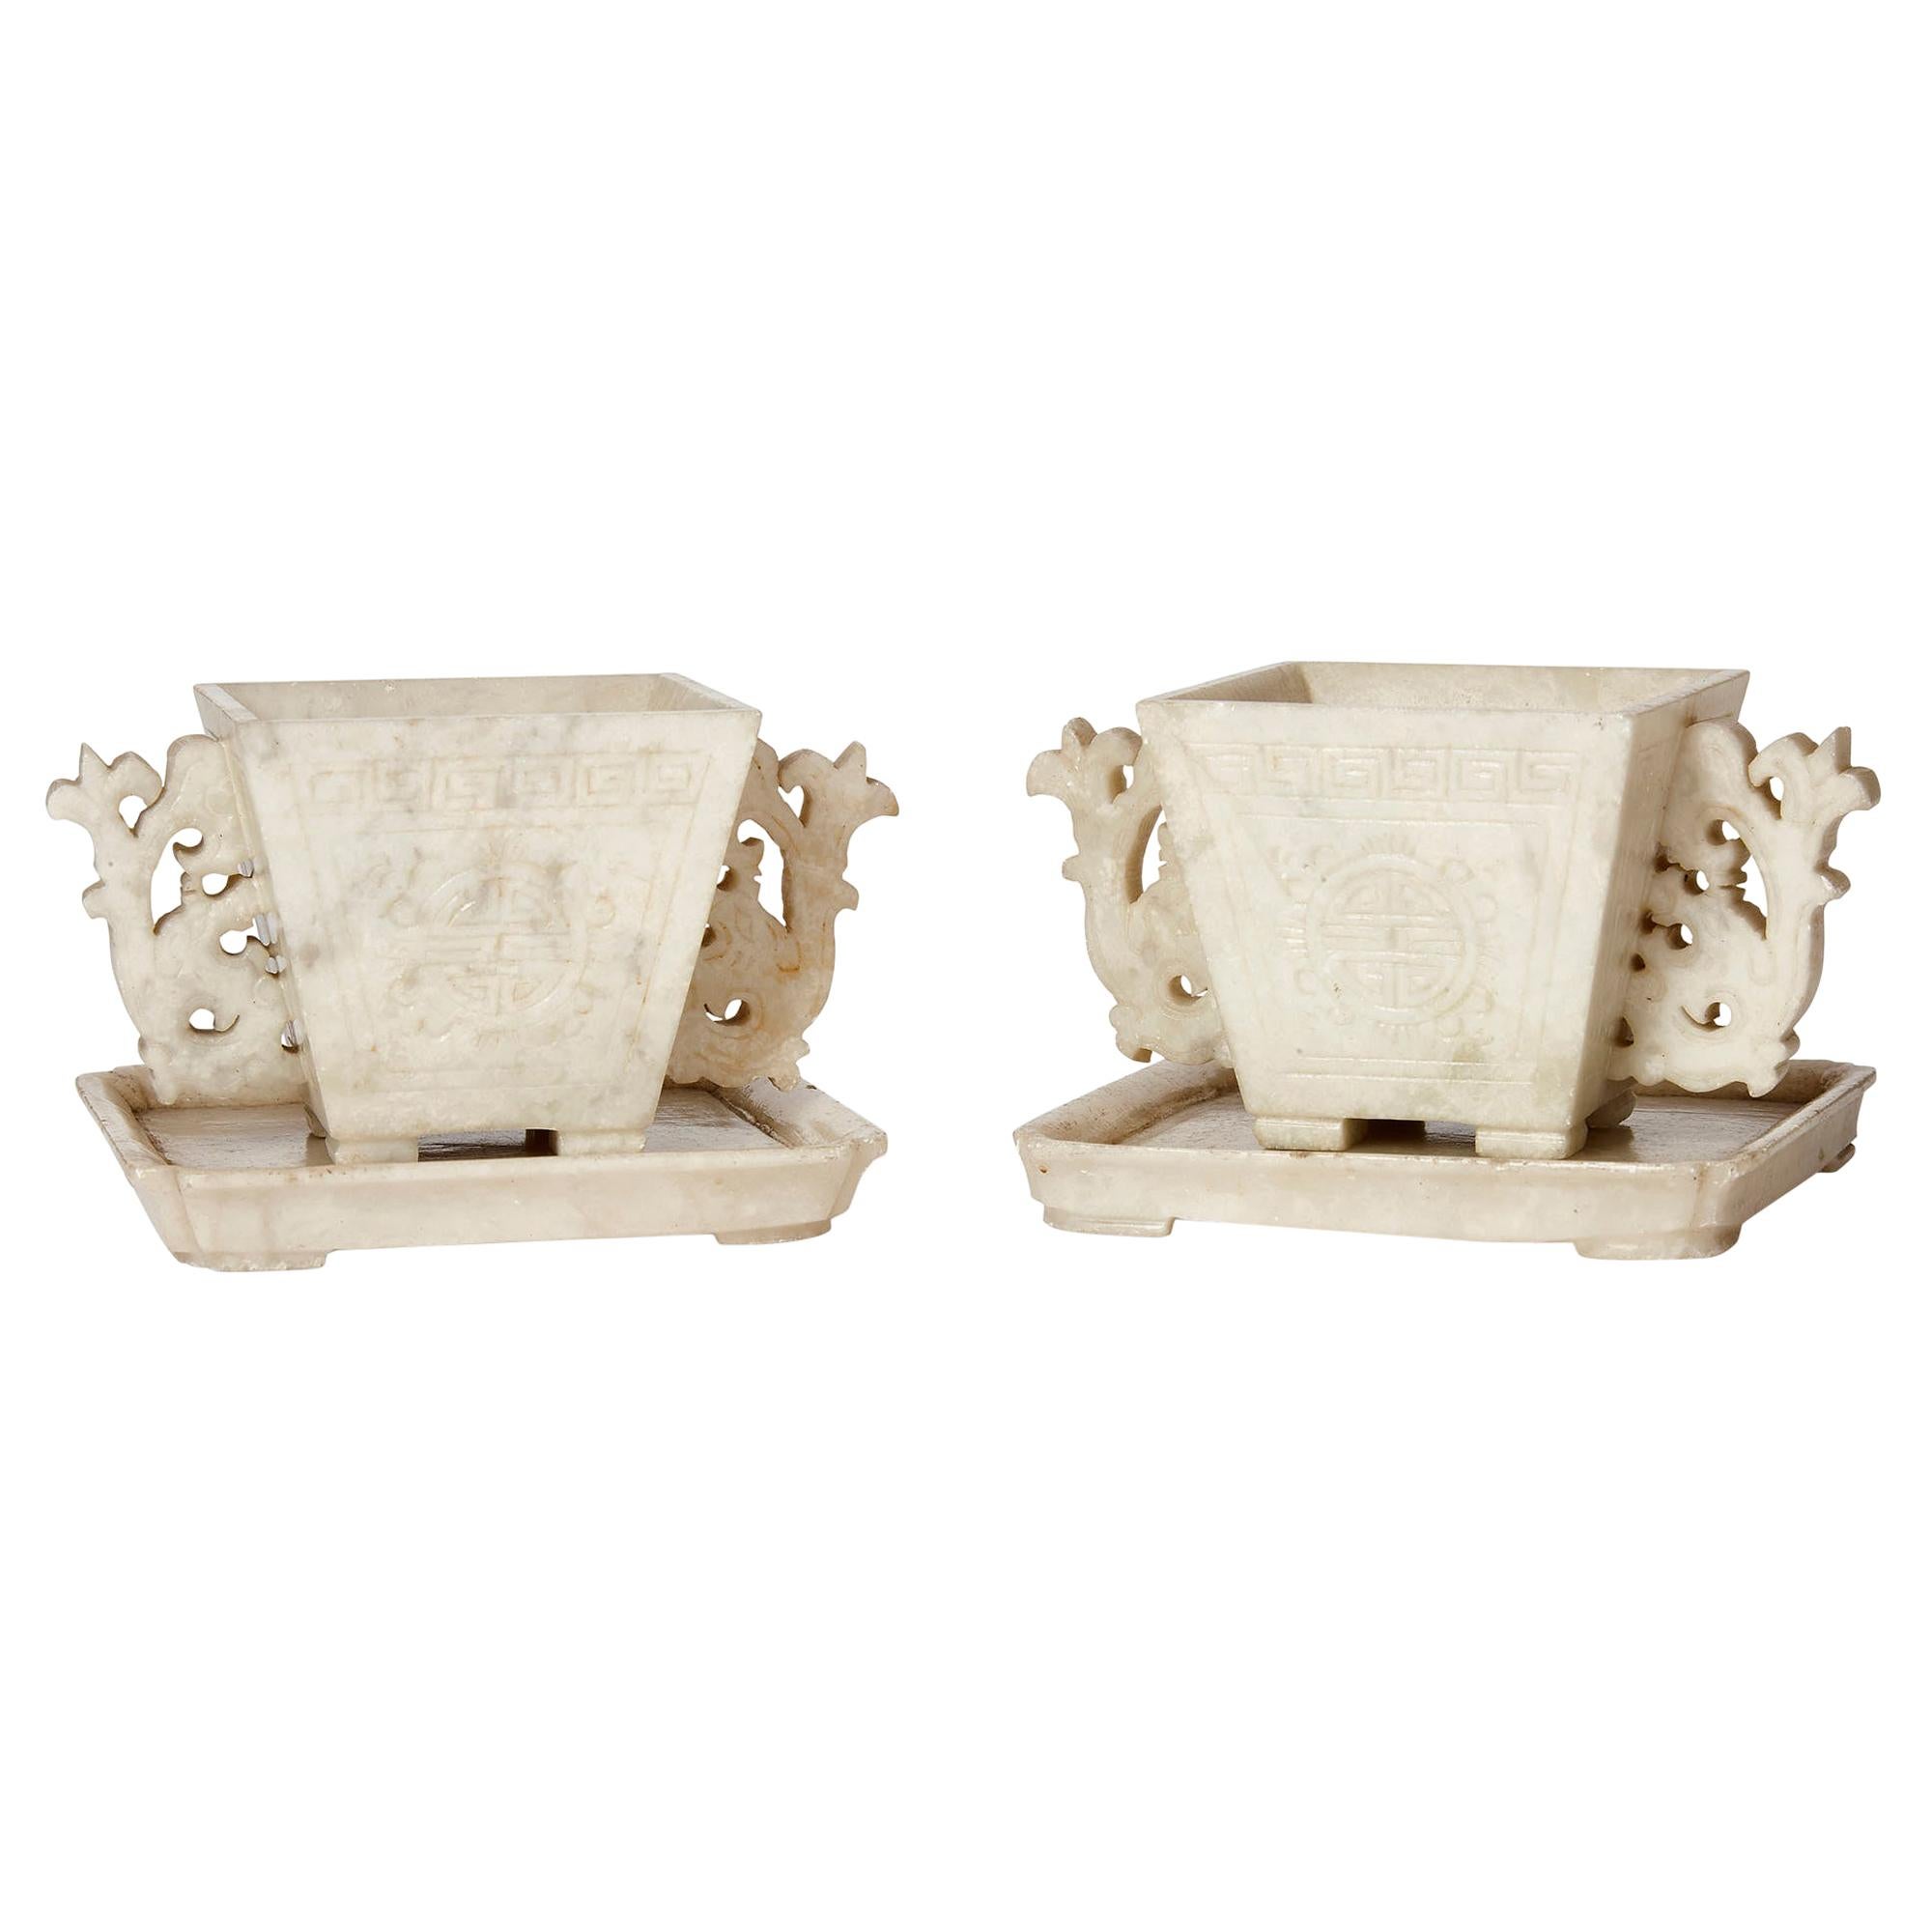 Pair of Traditional Chinese Soapstone Cups